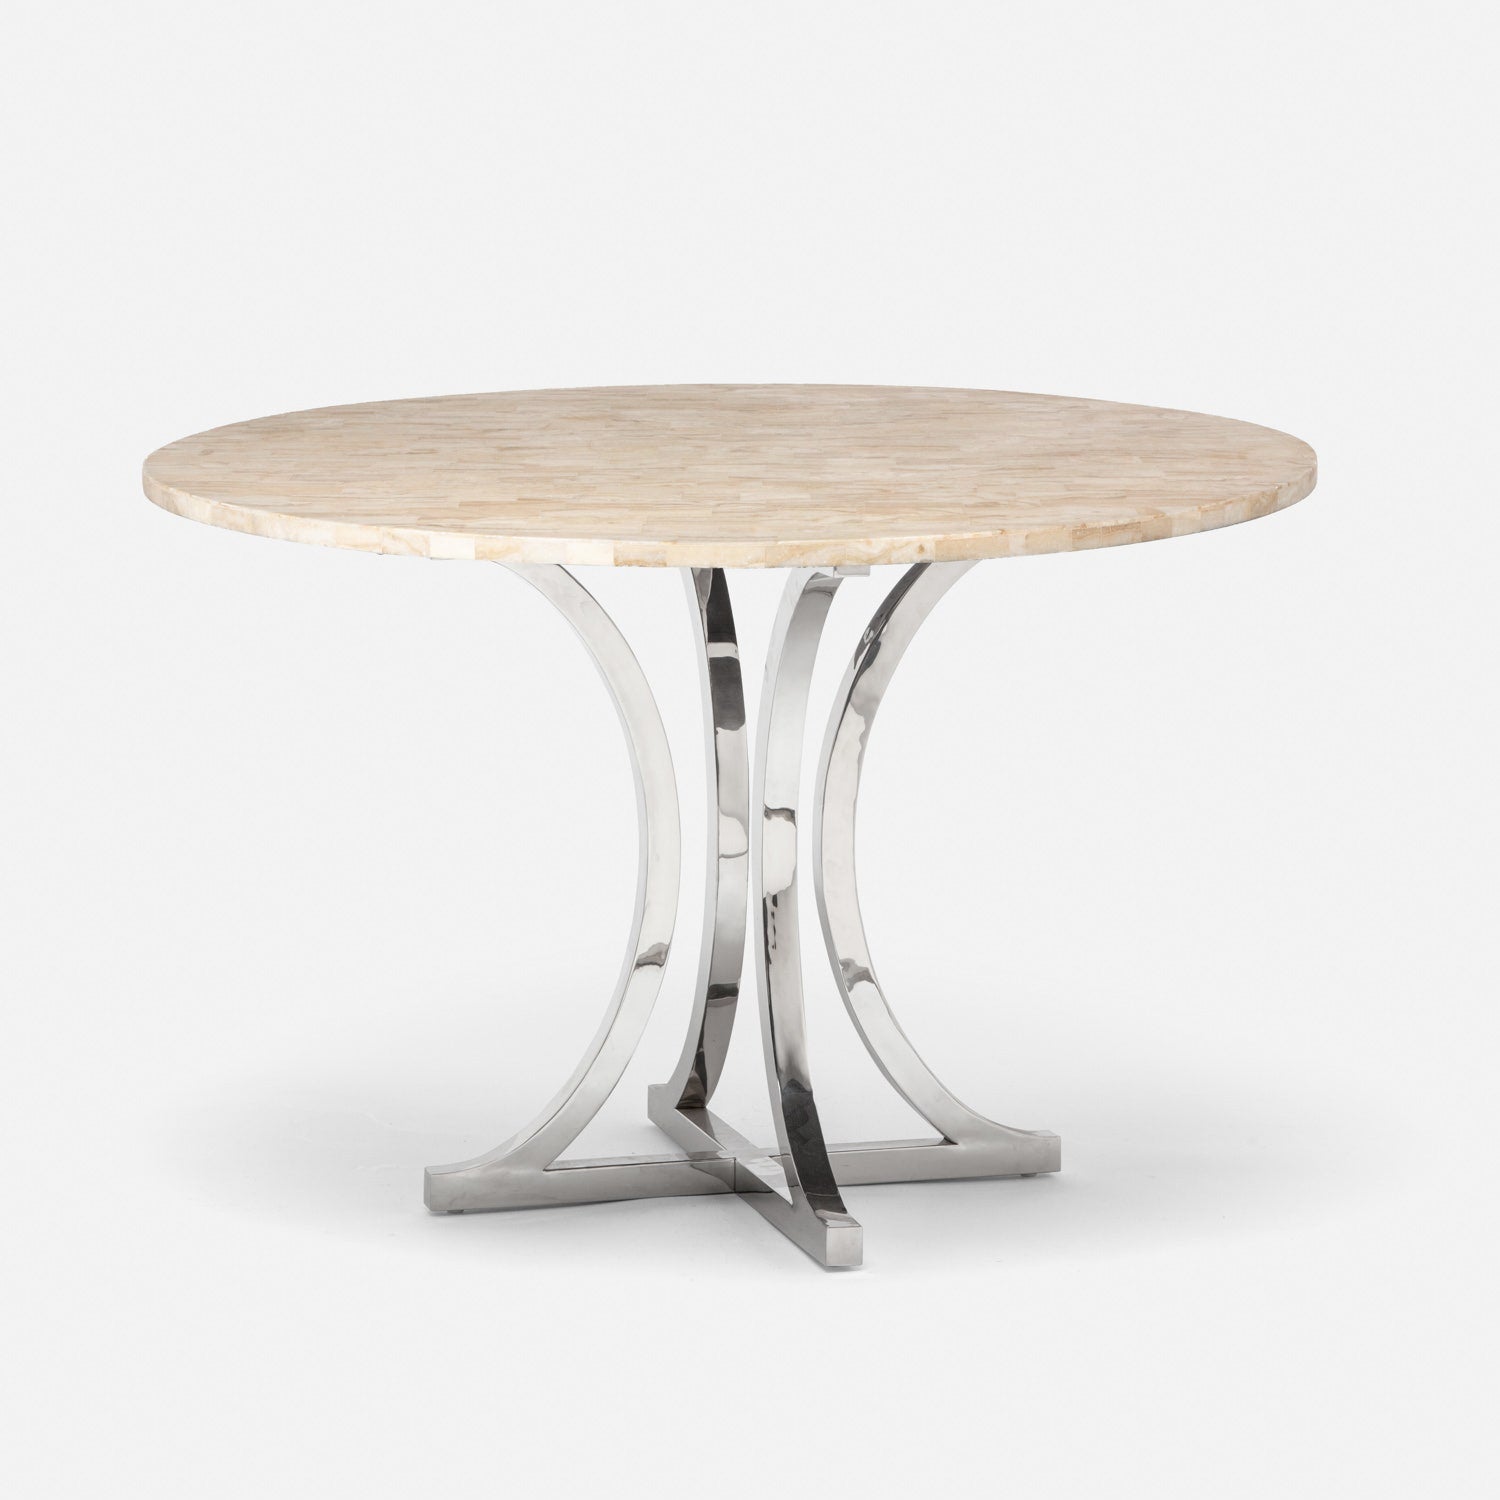 Made Goods Leighton 48" x 30" Polished Silver Steel Dinning Table With Round Beige Crystal Stone Table Top